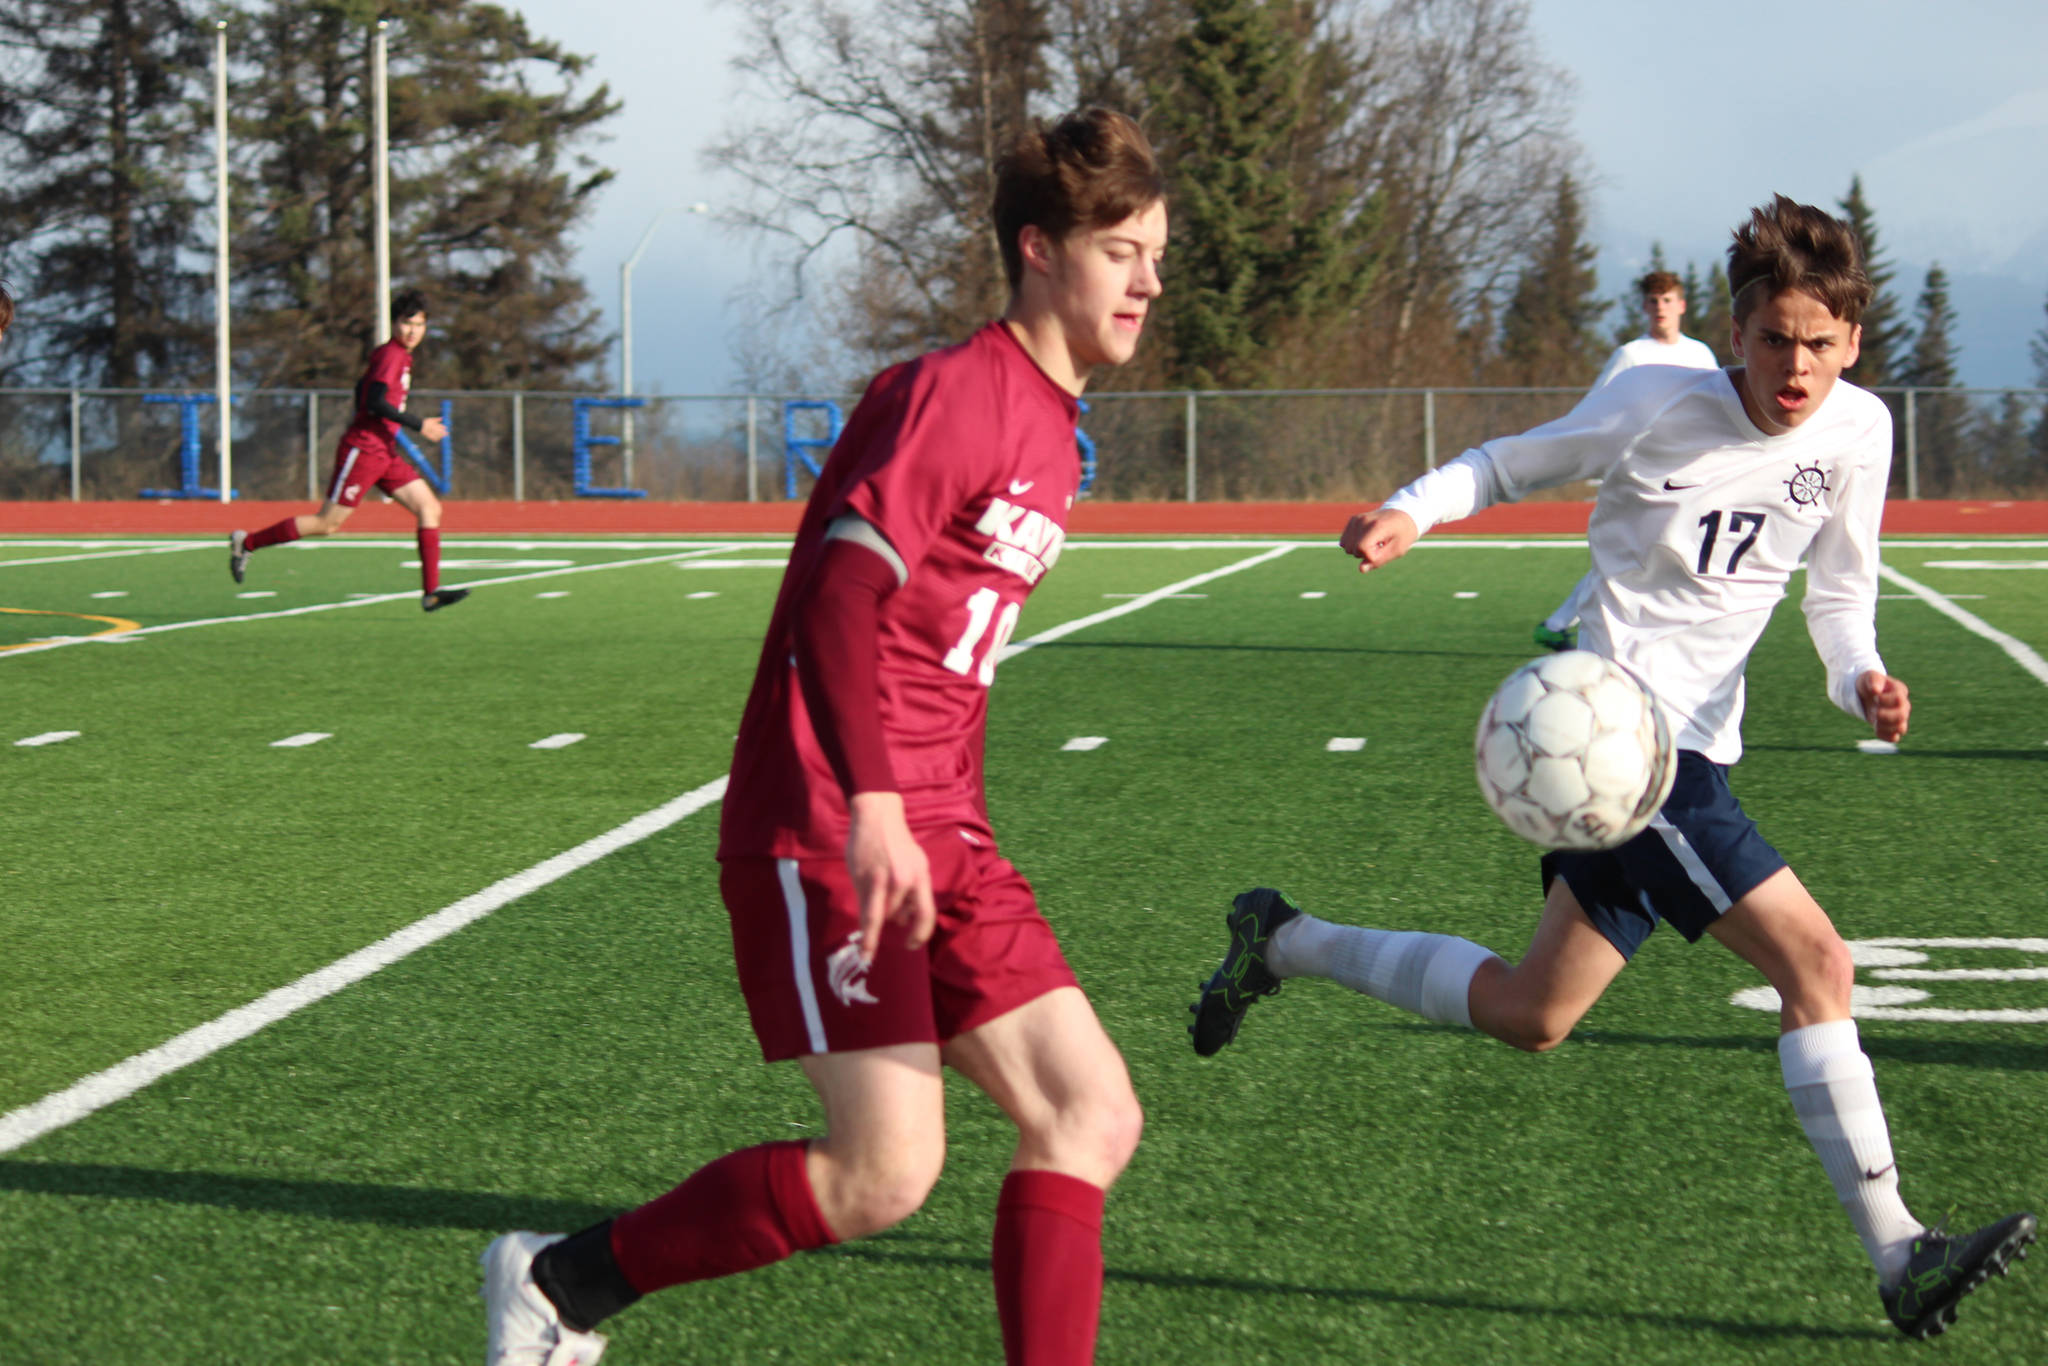 Ketchikan’s Henning Pankow steadies the ball while Homer High School’s Isaiah Nevak looks for a way to intercept during their match Friday, May 4, 2018 in Homer, Alaska. Ketchikan won the match 1-0. (Photo by Megan Pacer/Homer News)